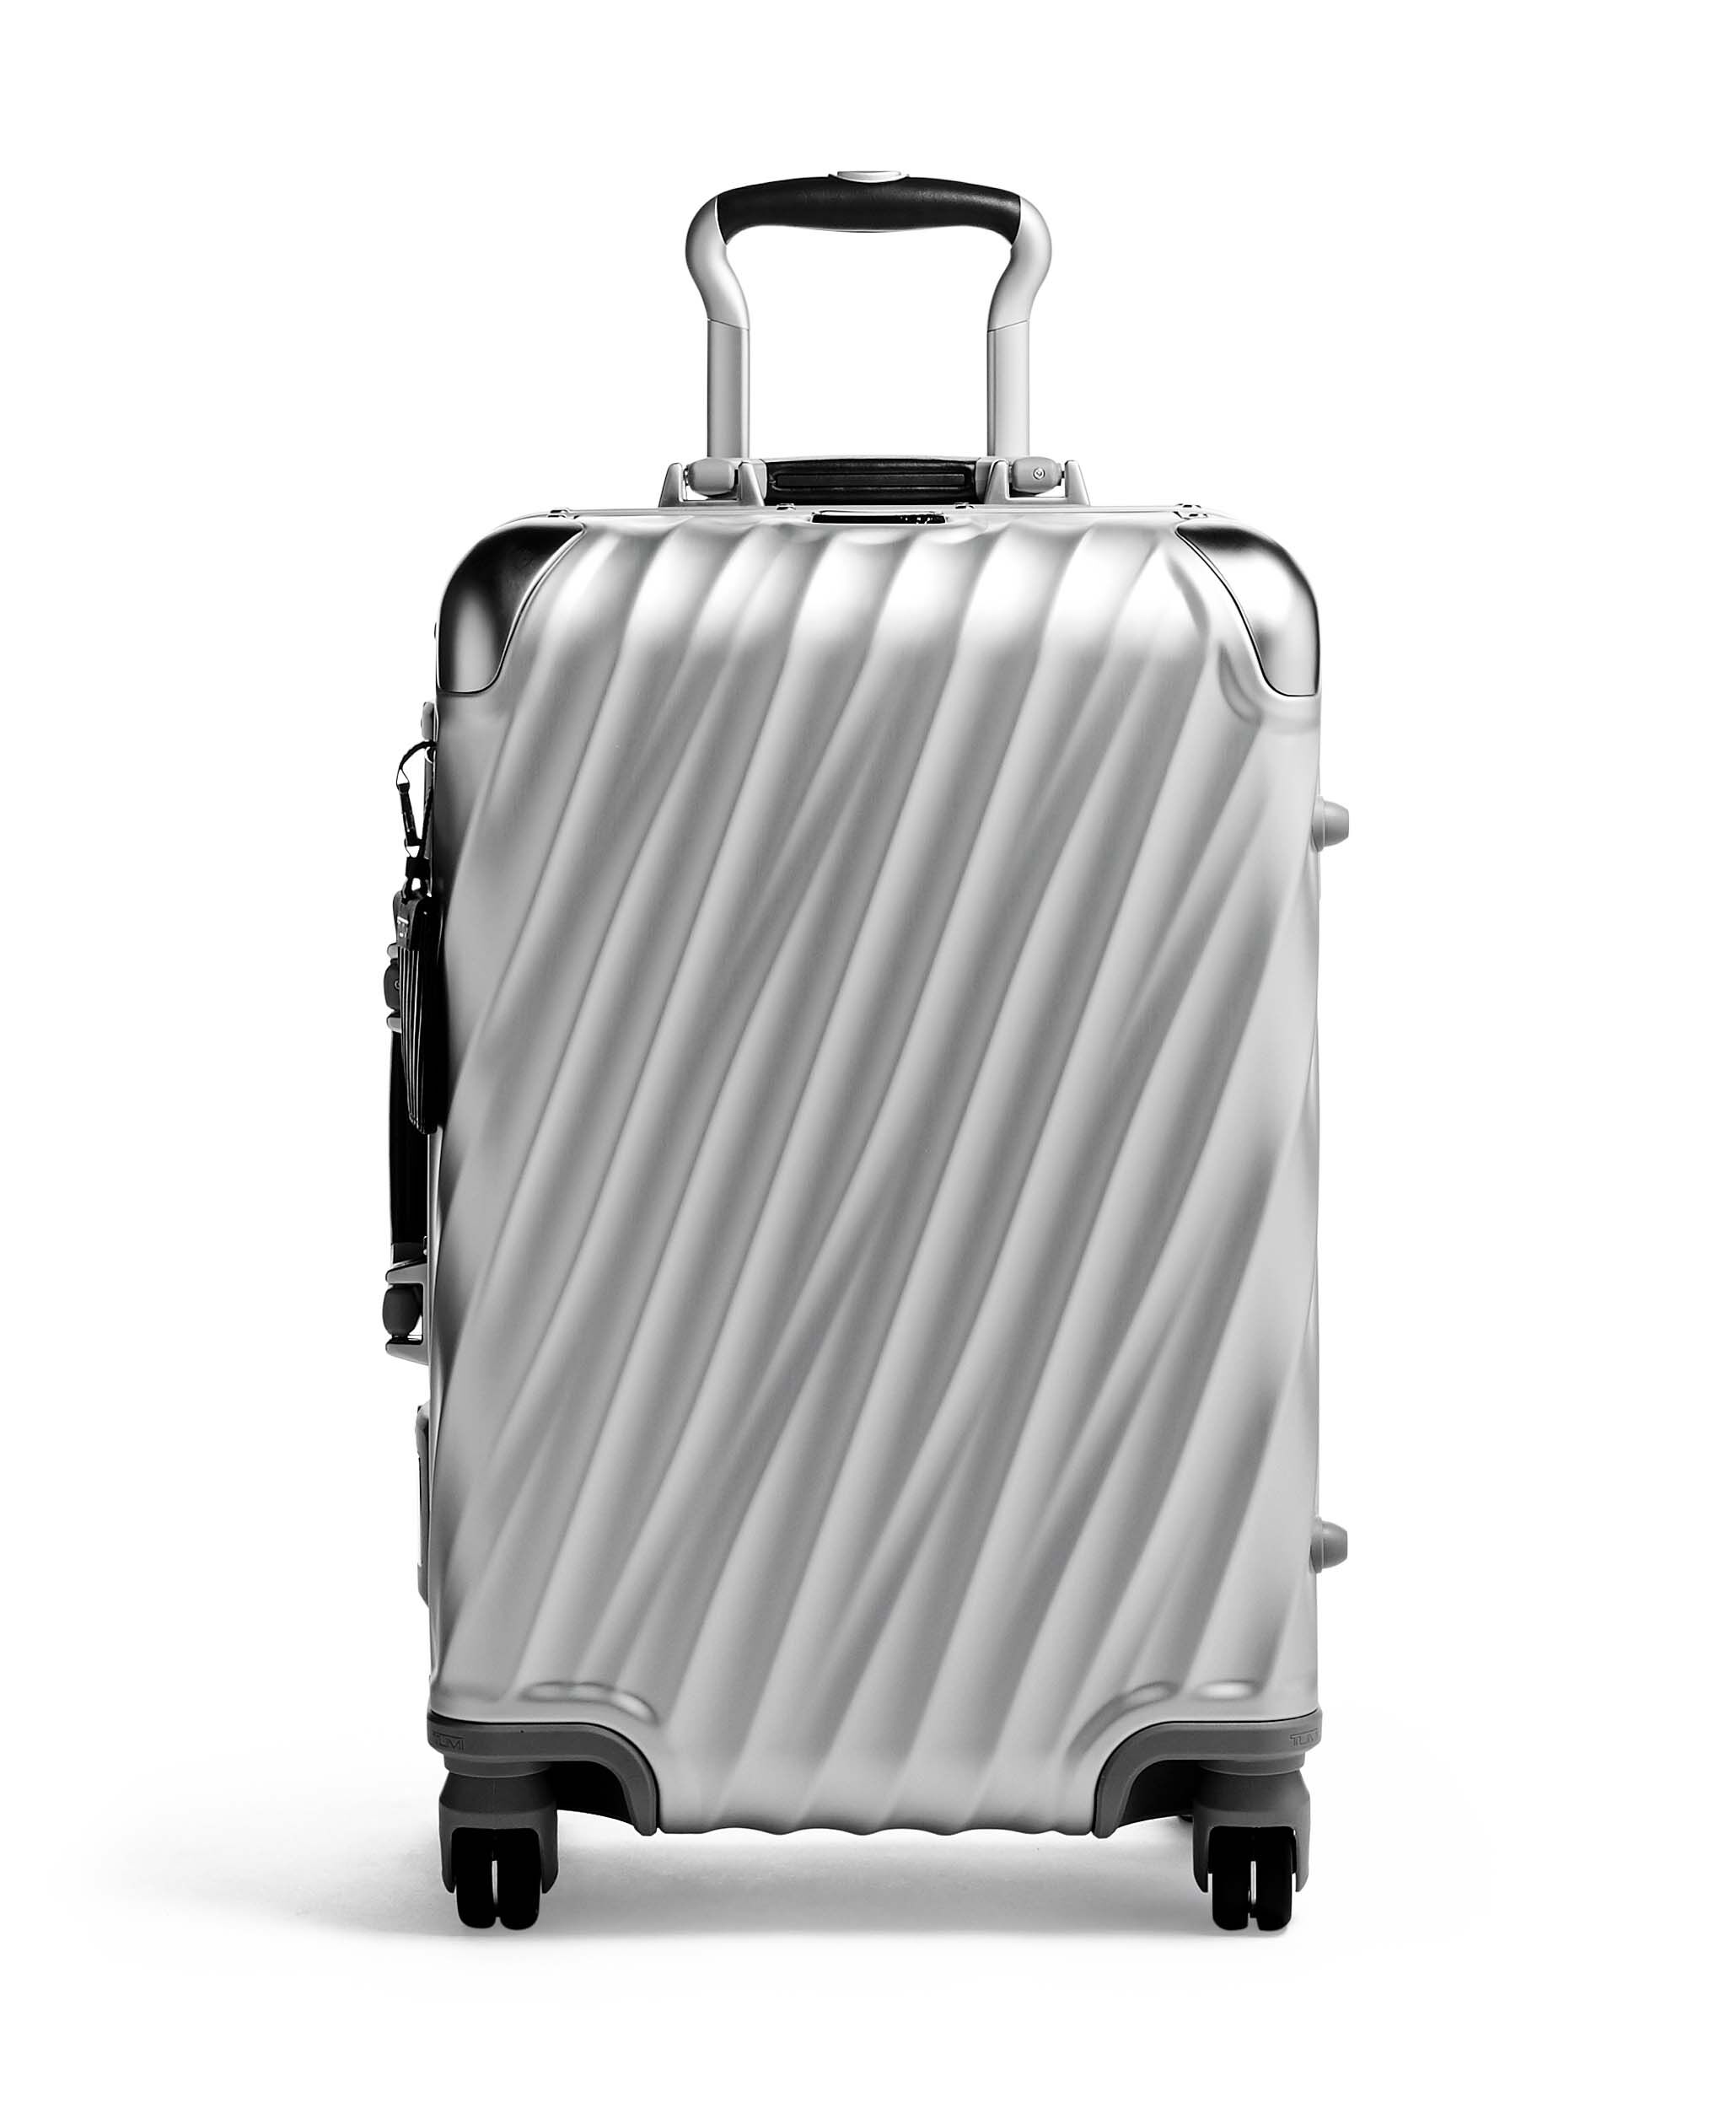 carry on luggage size air transat